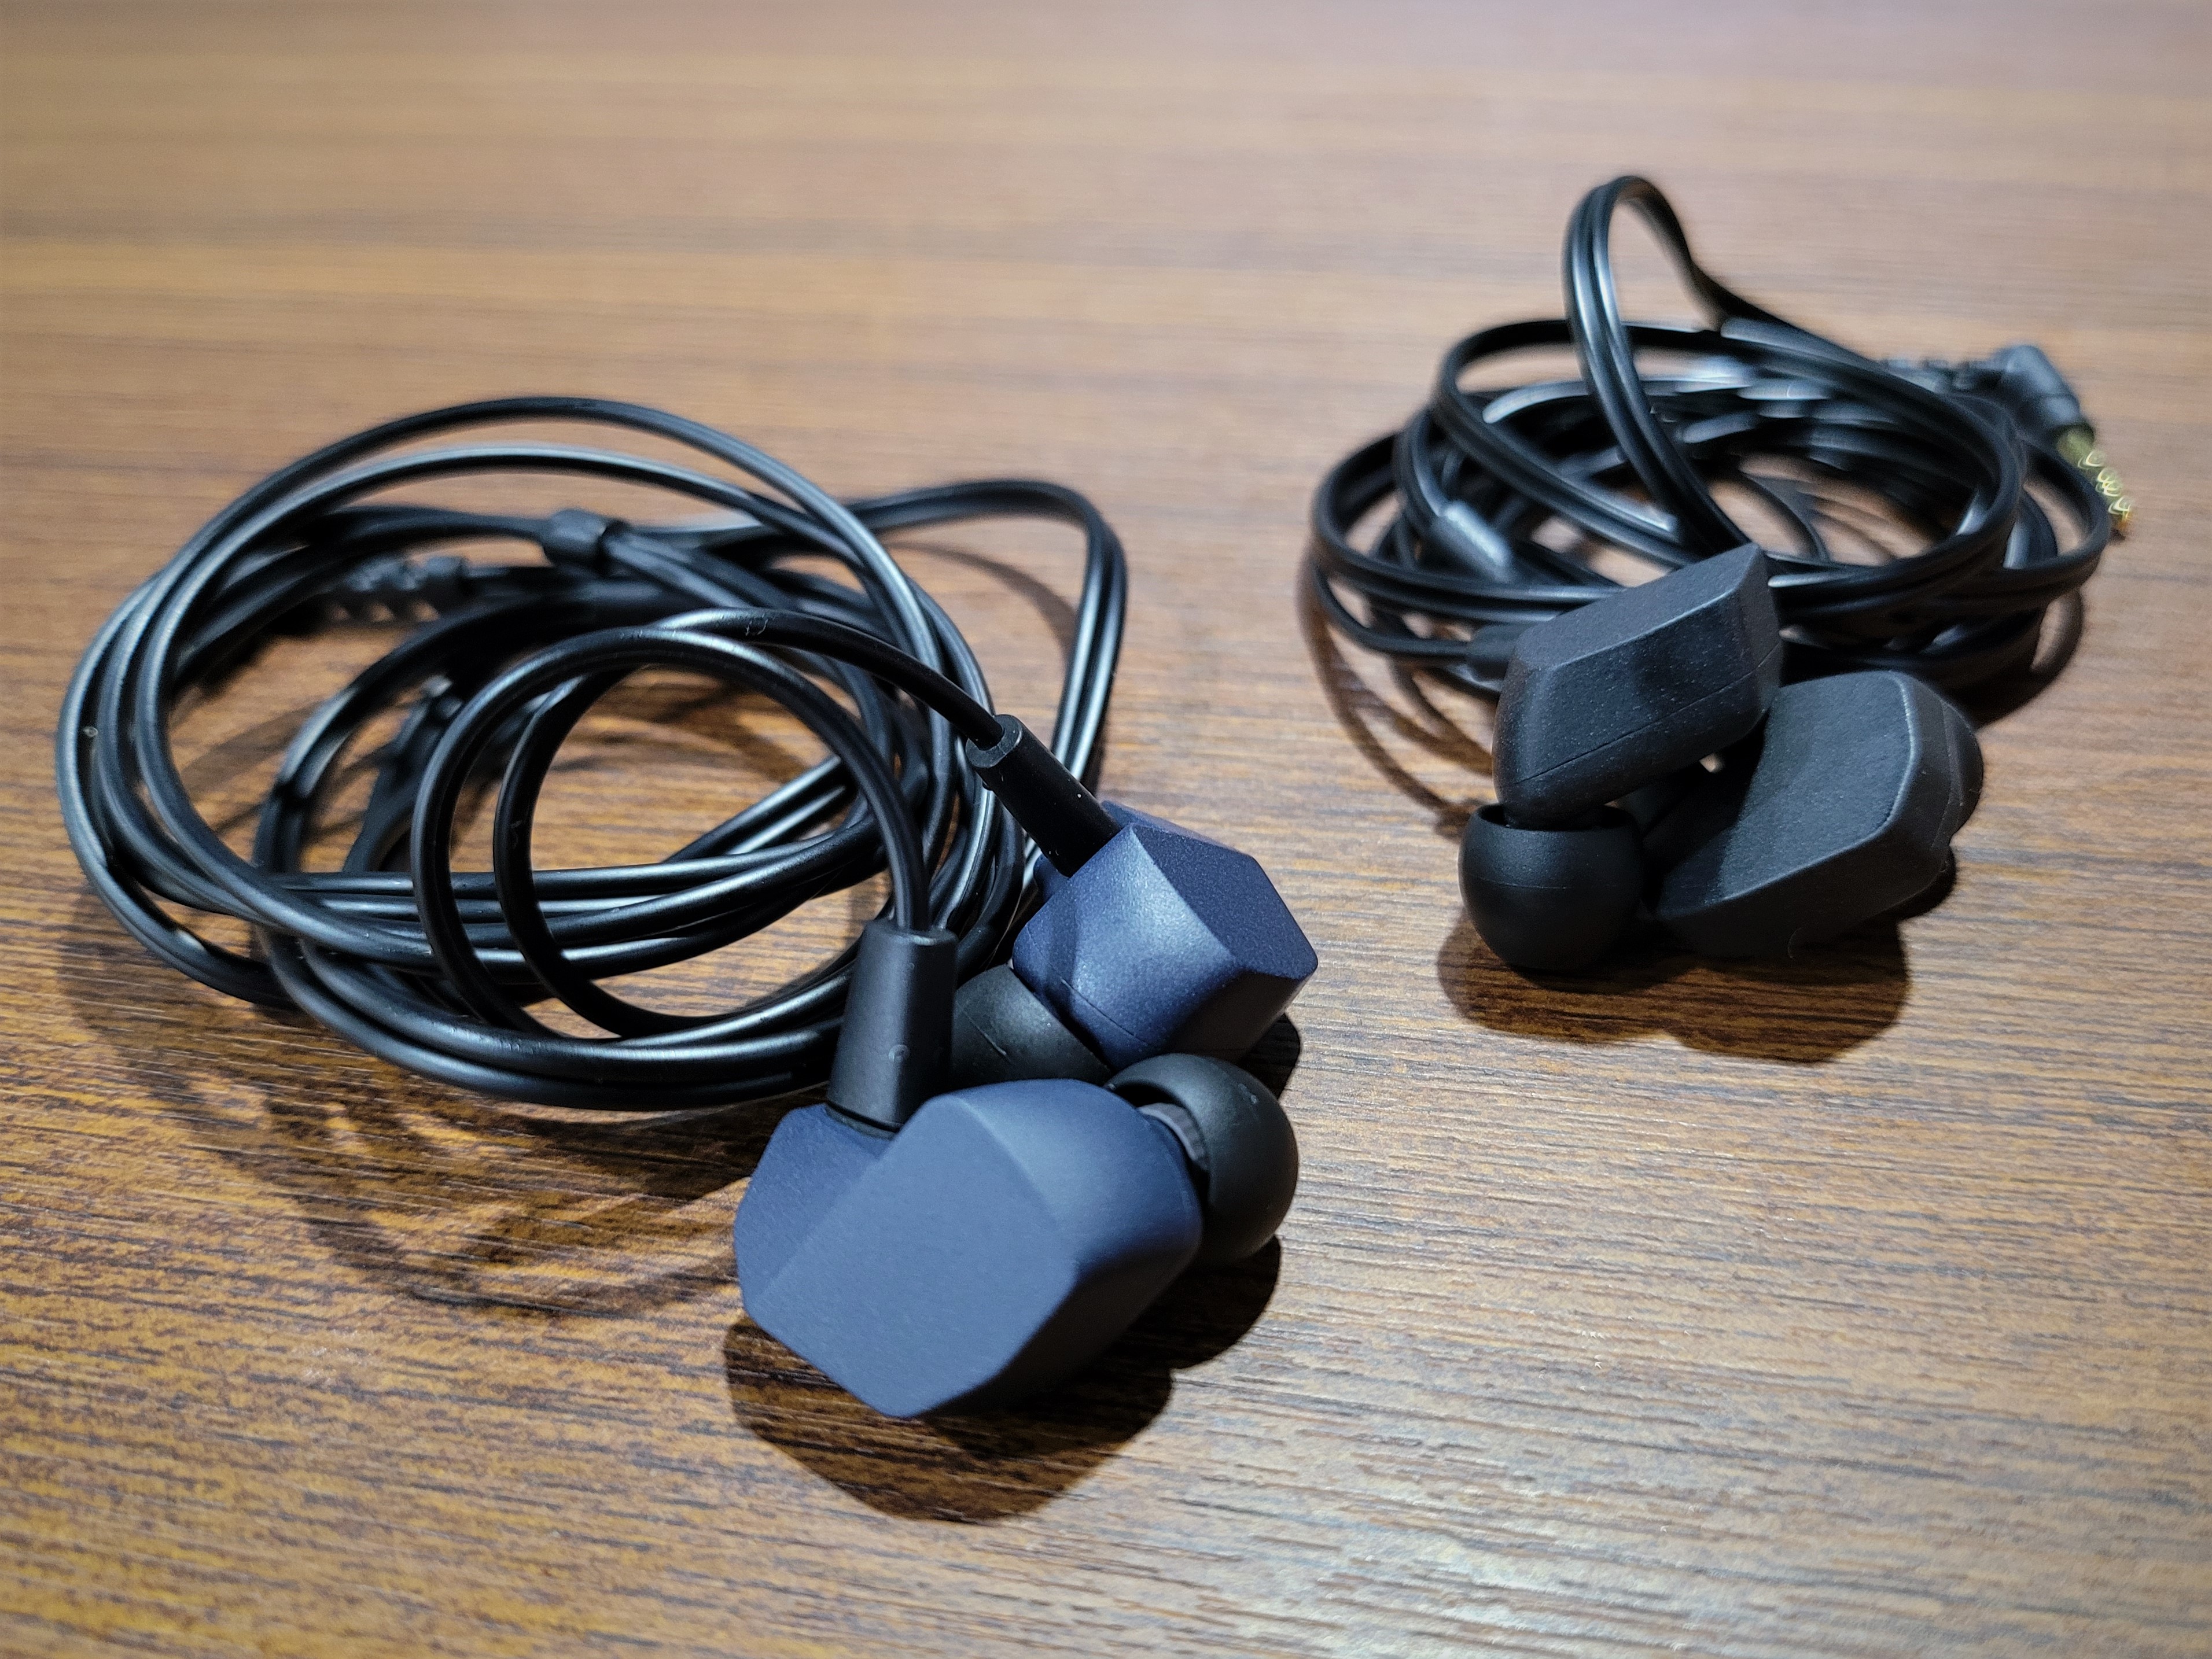 Crinnotes] Final Audio A3000 and A4000: Budget-isation – In-Ear